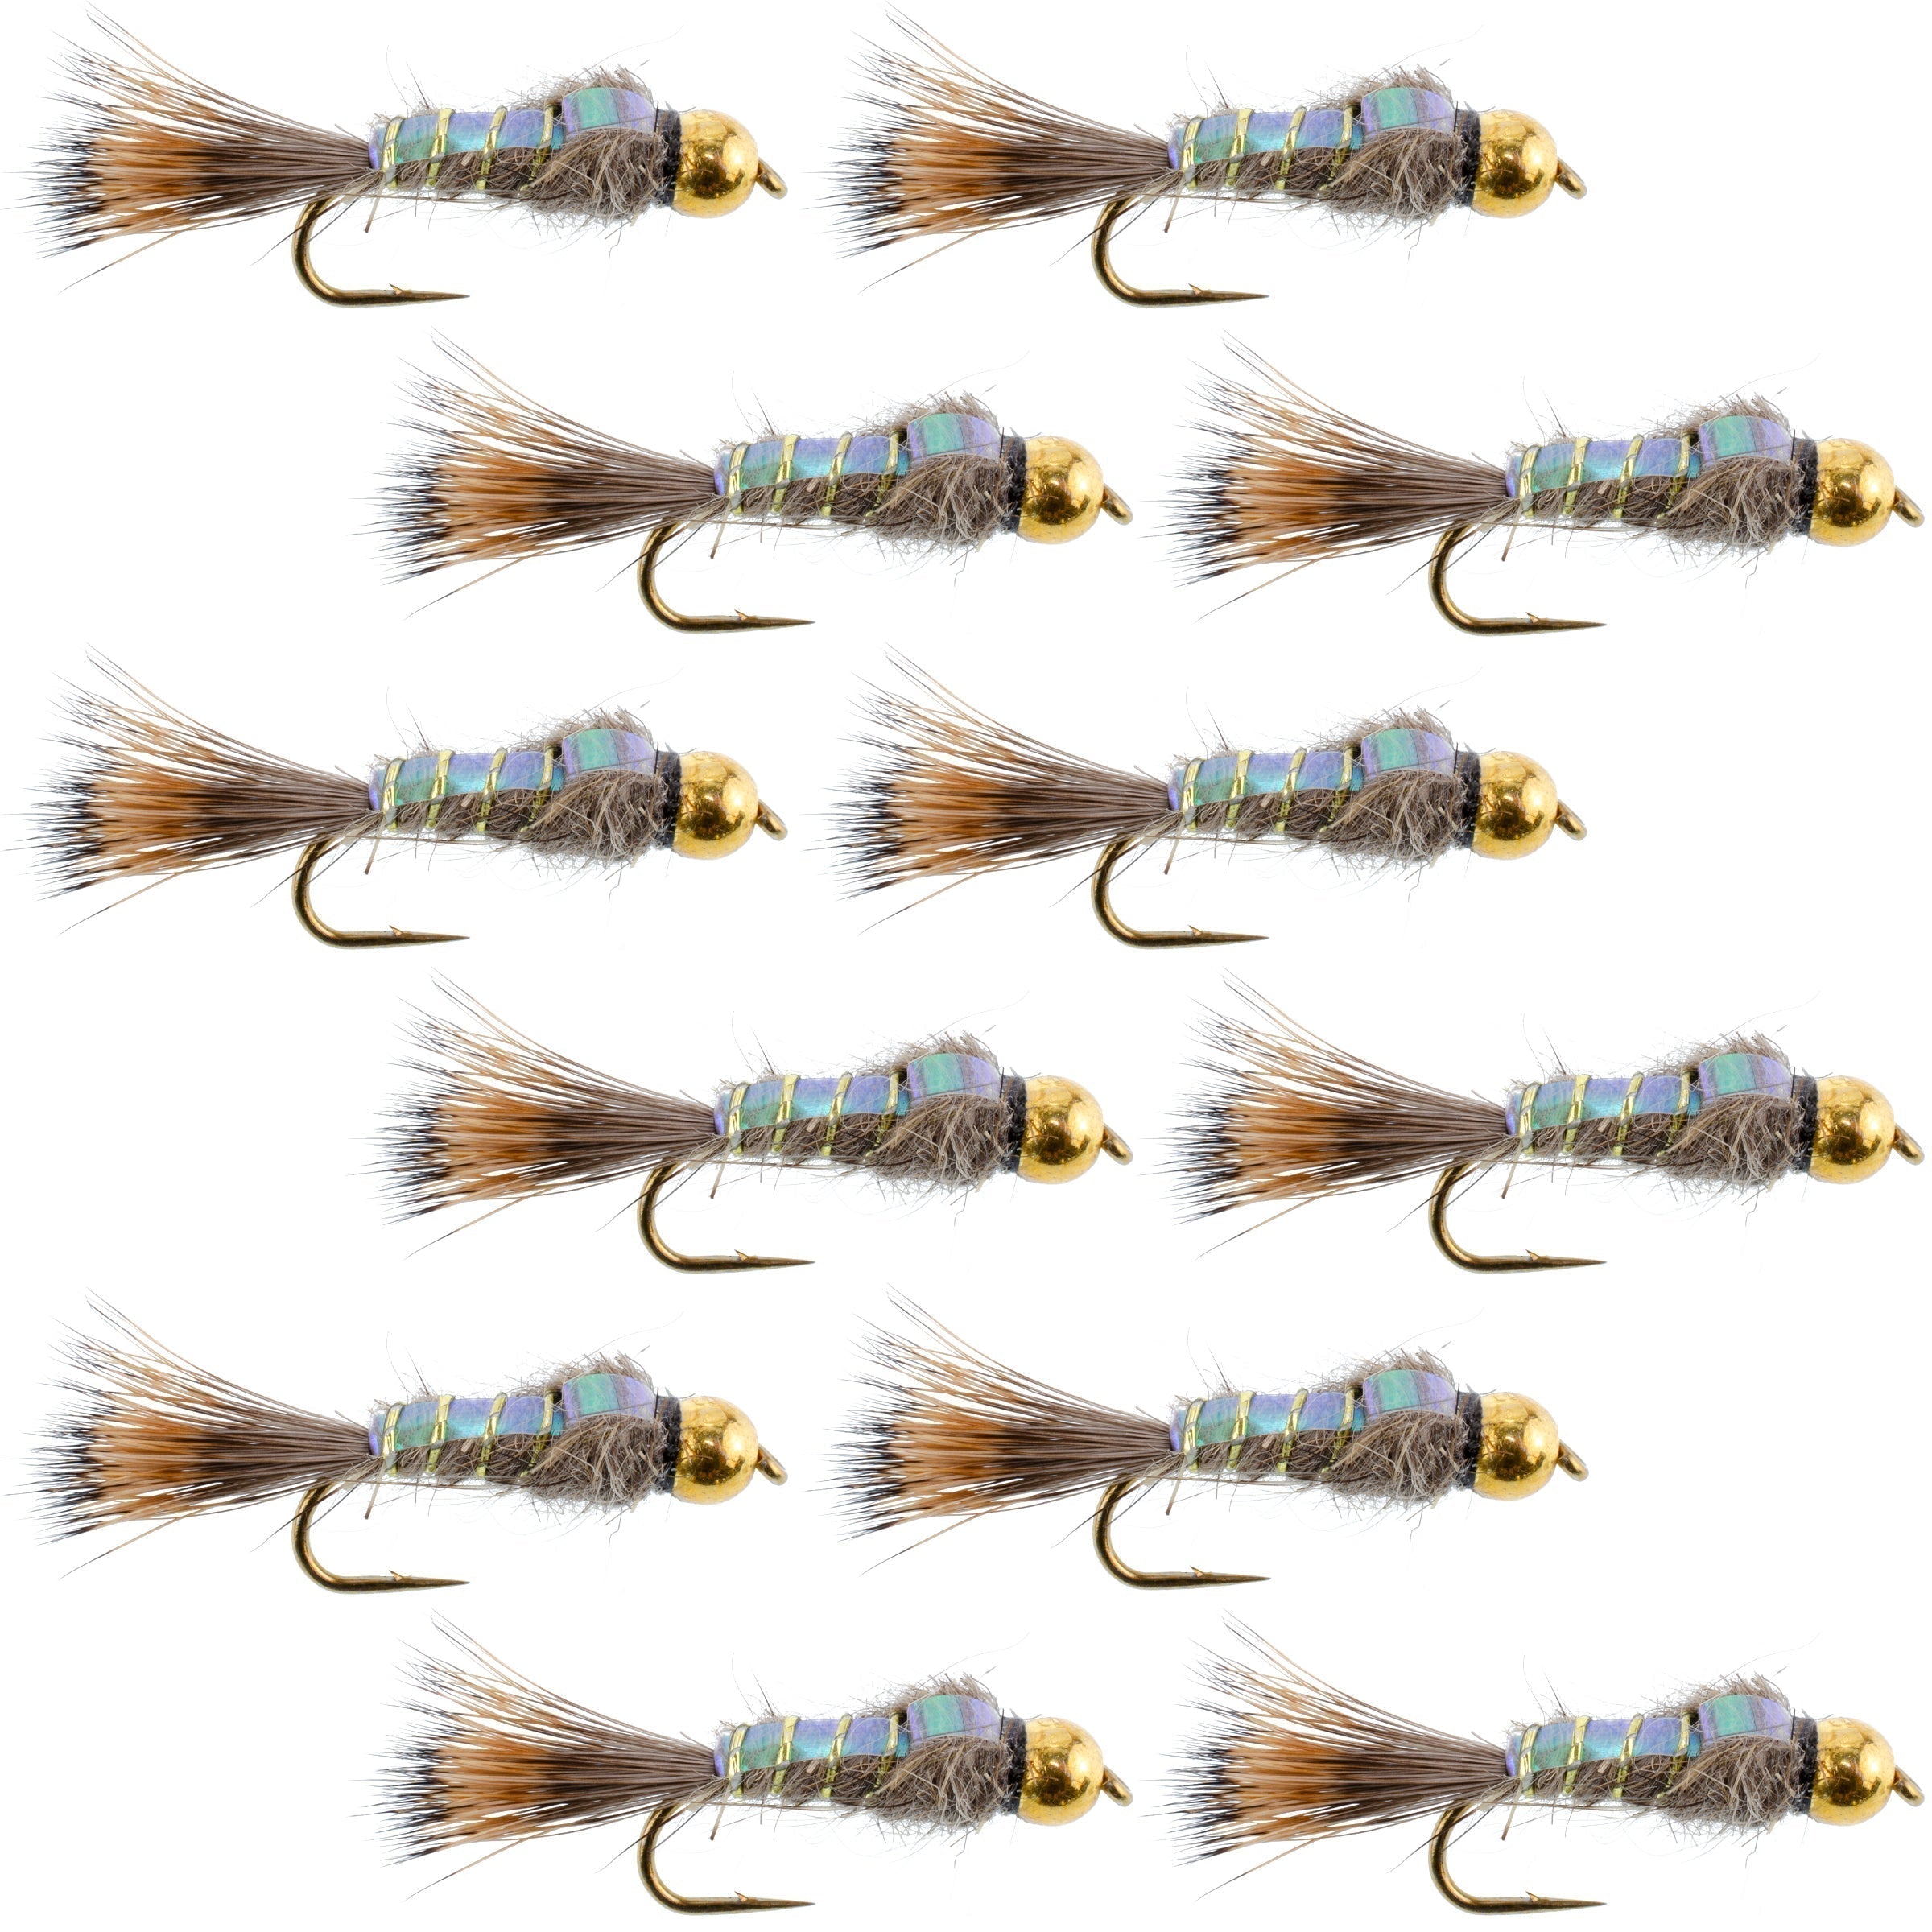 Tungsten Bead Flashback Gold Ribbed Hare's Ear Trout Fly 1 Dozen Nymph Wet Flies Size 10